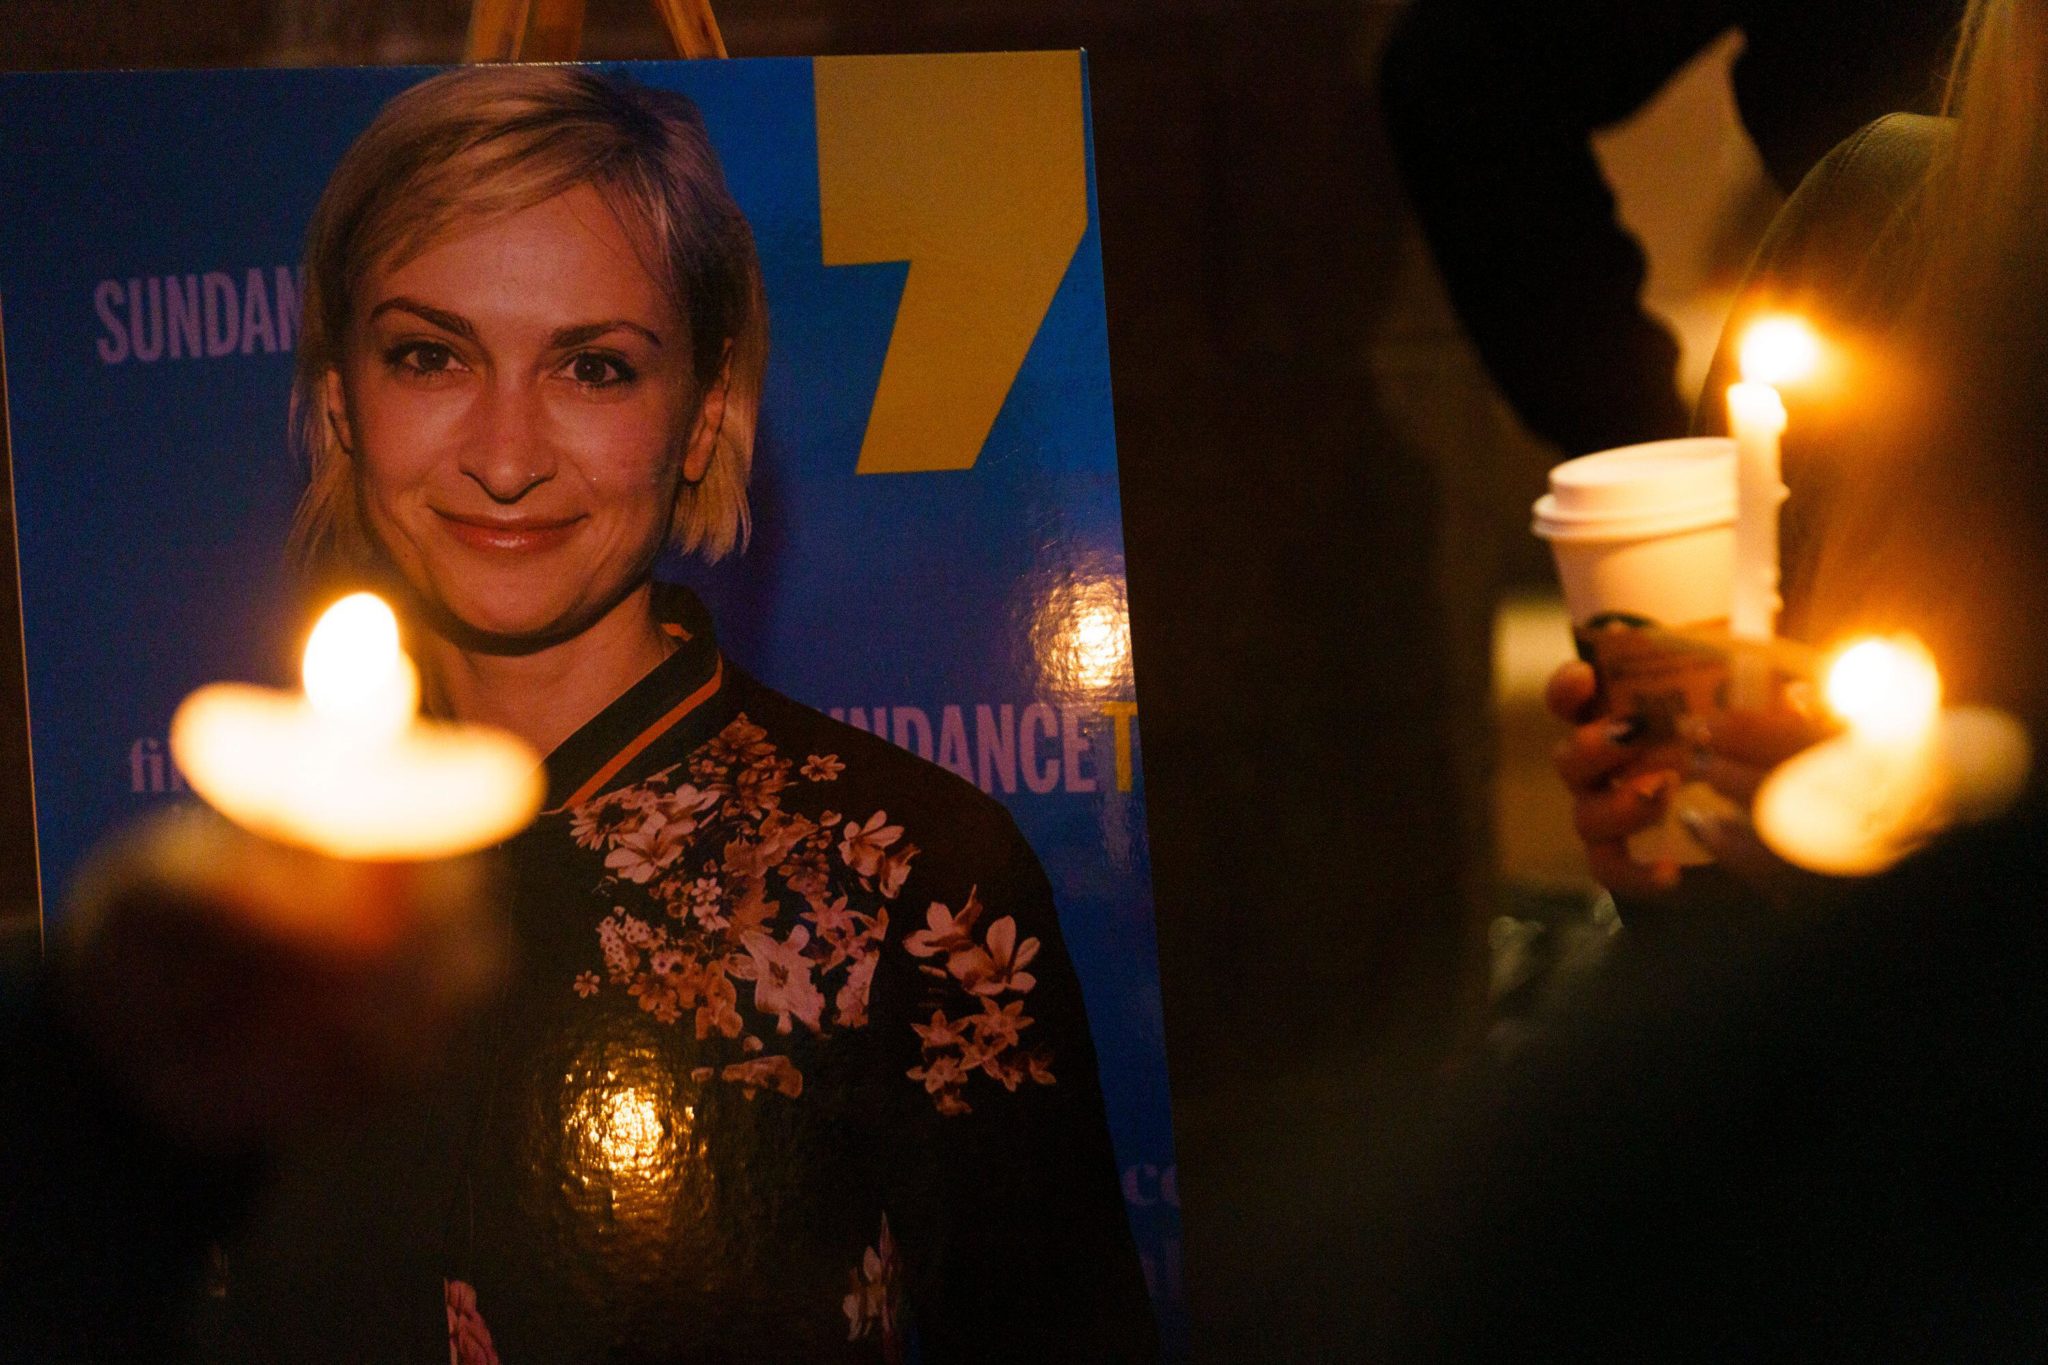 Members of a crowd hold up candles to remember Halyna Hutchins, after her death on the set of Rust, at the Albuquerque Civic Plaza in New Mexico in October 2021.